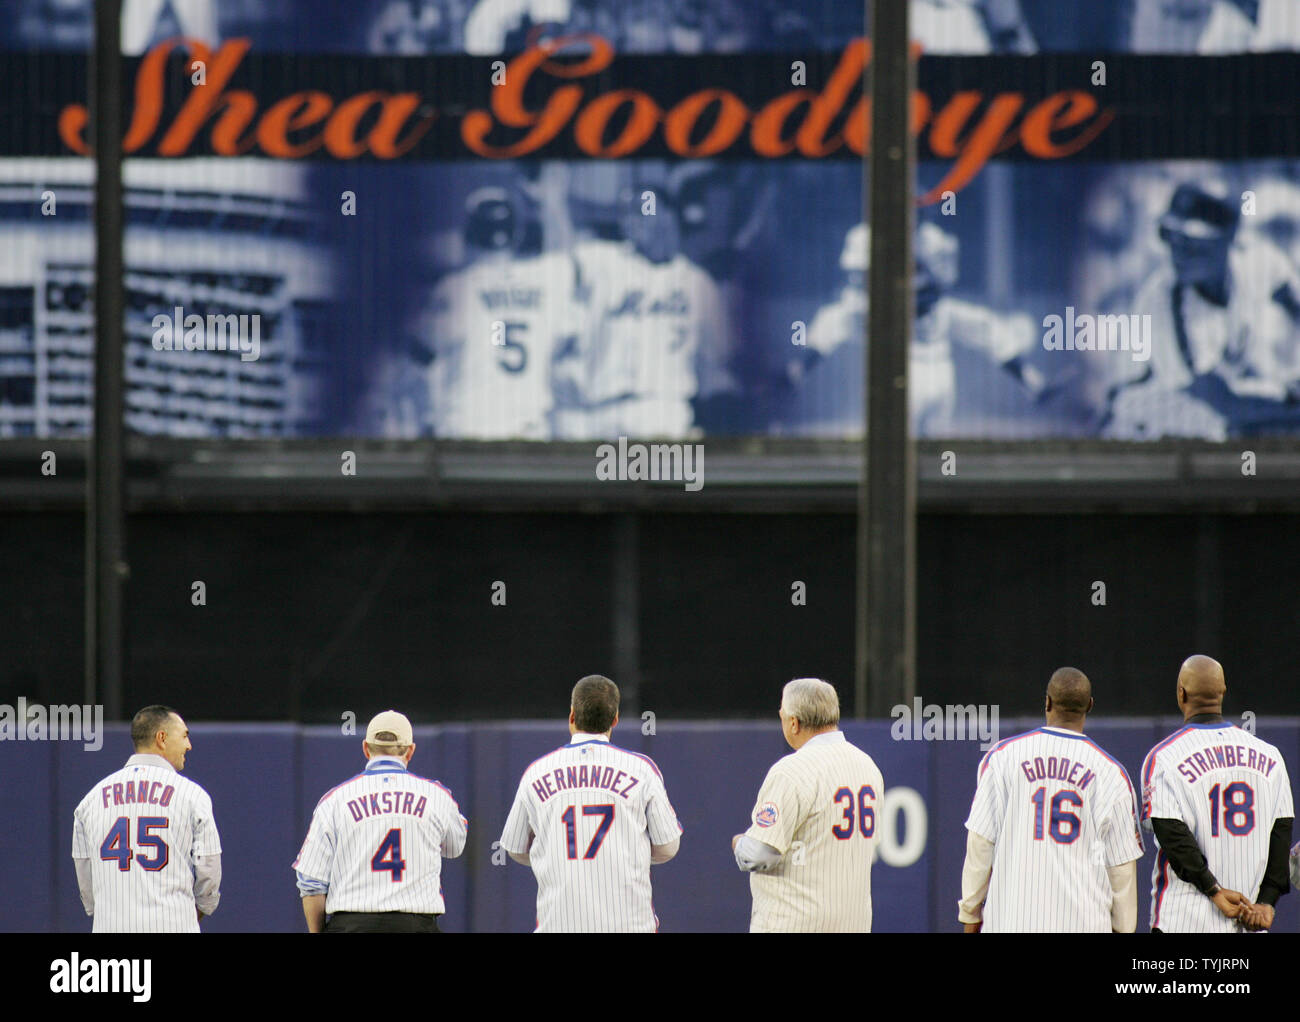 Former New York Mets are introduced during the closing ceremony of Shea Stadium following the Mets final regular season game against the Florida Marlins on September 28, 2008 in New York City. Shea stadium, which was built in 1964, will be replaced with the new Citifield starting next season.   ( UPI Photo/Monika Graff) Stock Photo